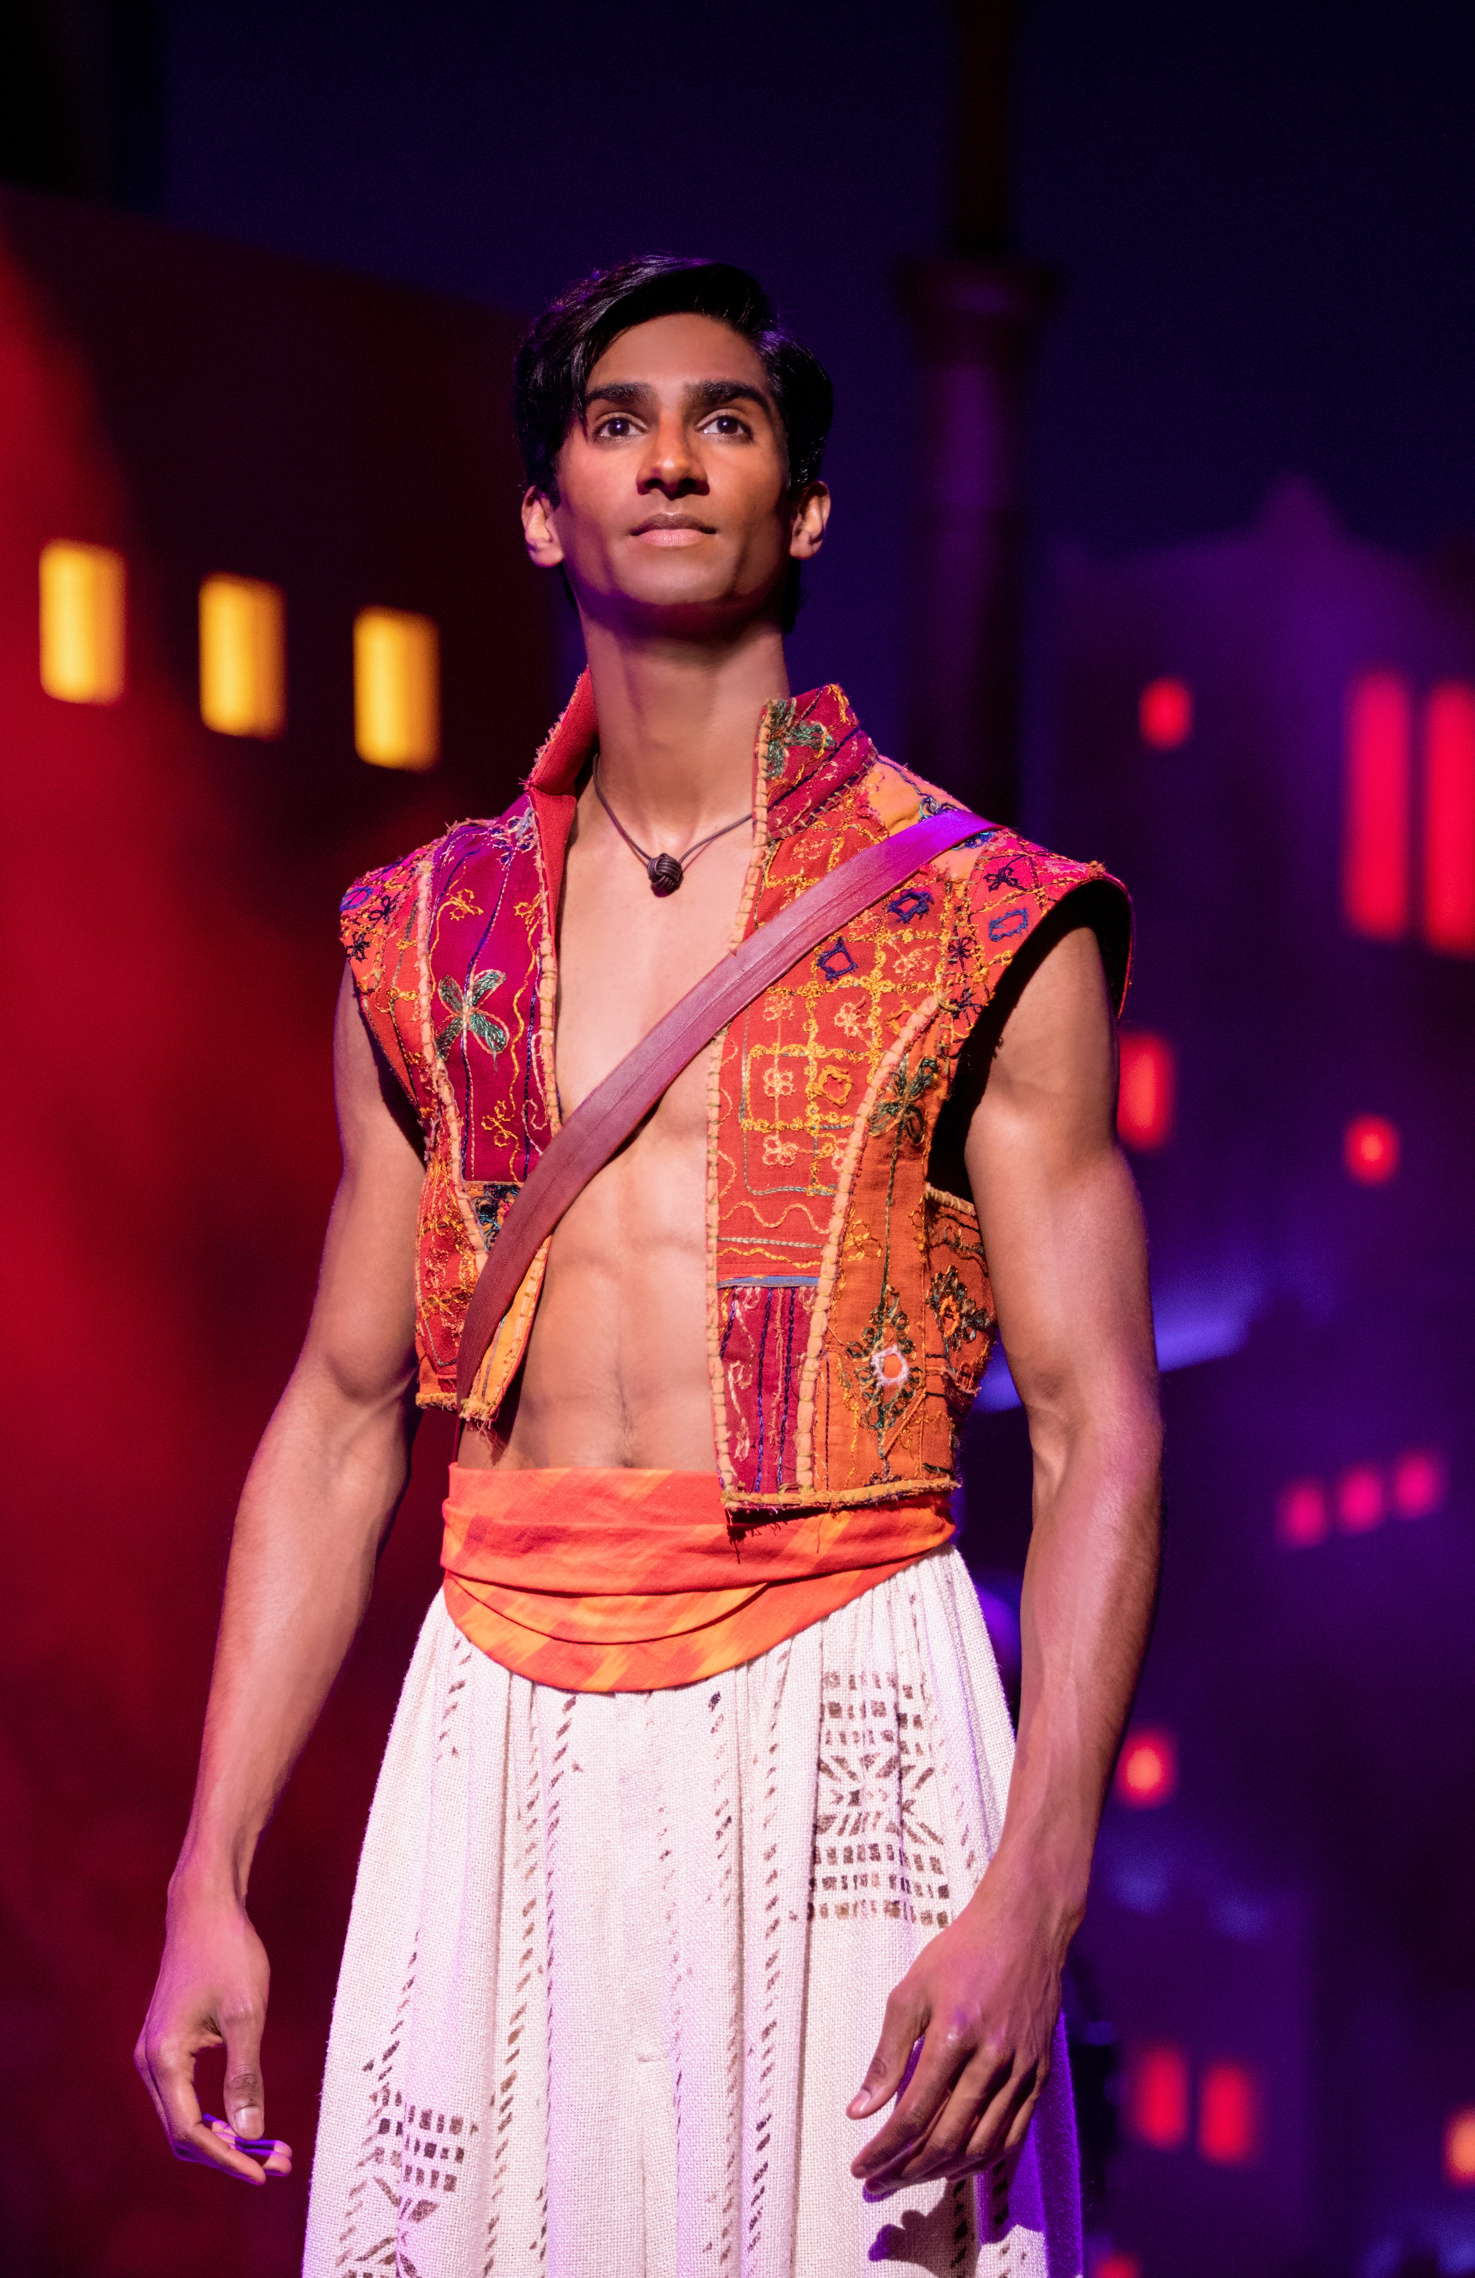 Aladdin's New Star Michael Maliakel on How He 'Shimmied' Into Theater